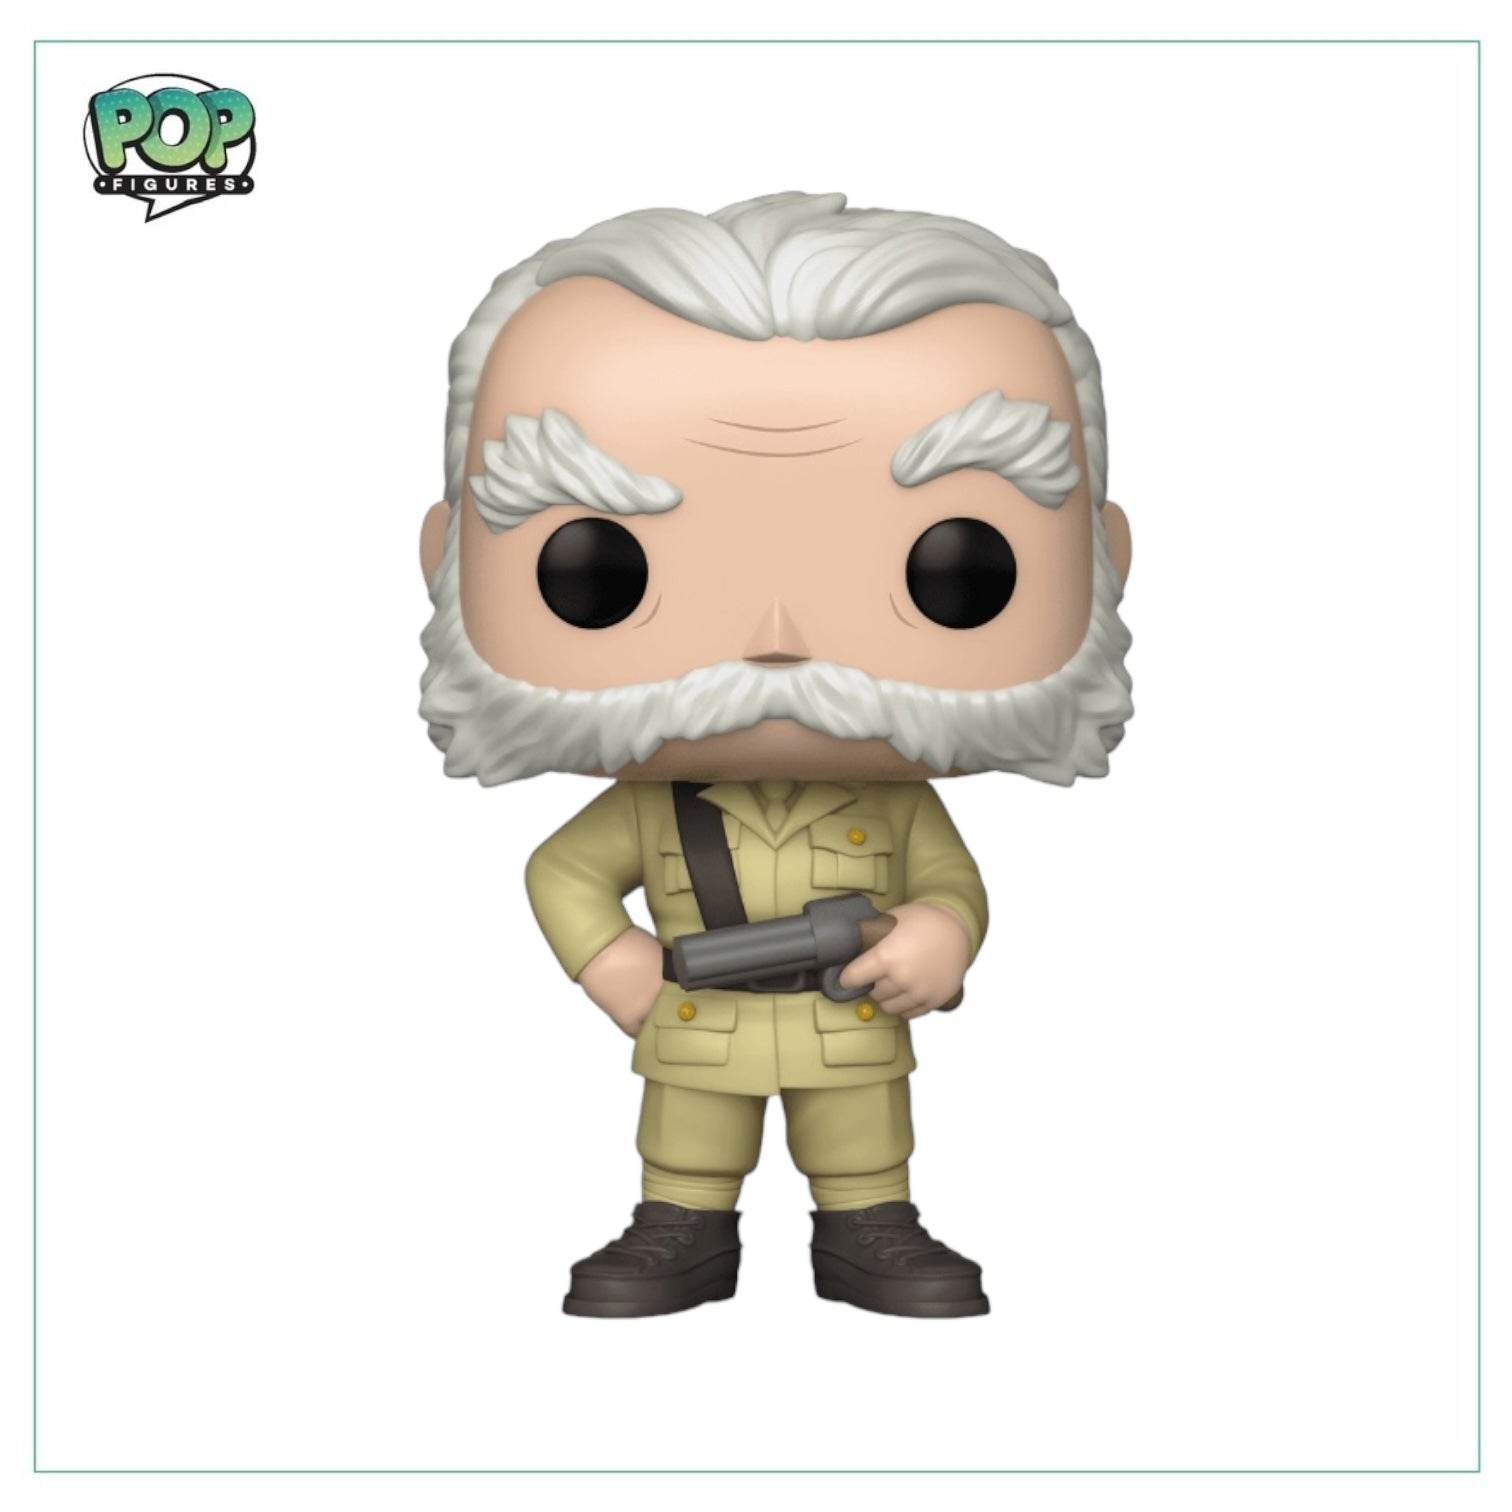 Colonel Mustard with the Revolver #53 Funko Pop! Retro Toys, 2021 Target Limited Edition Exclusive